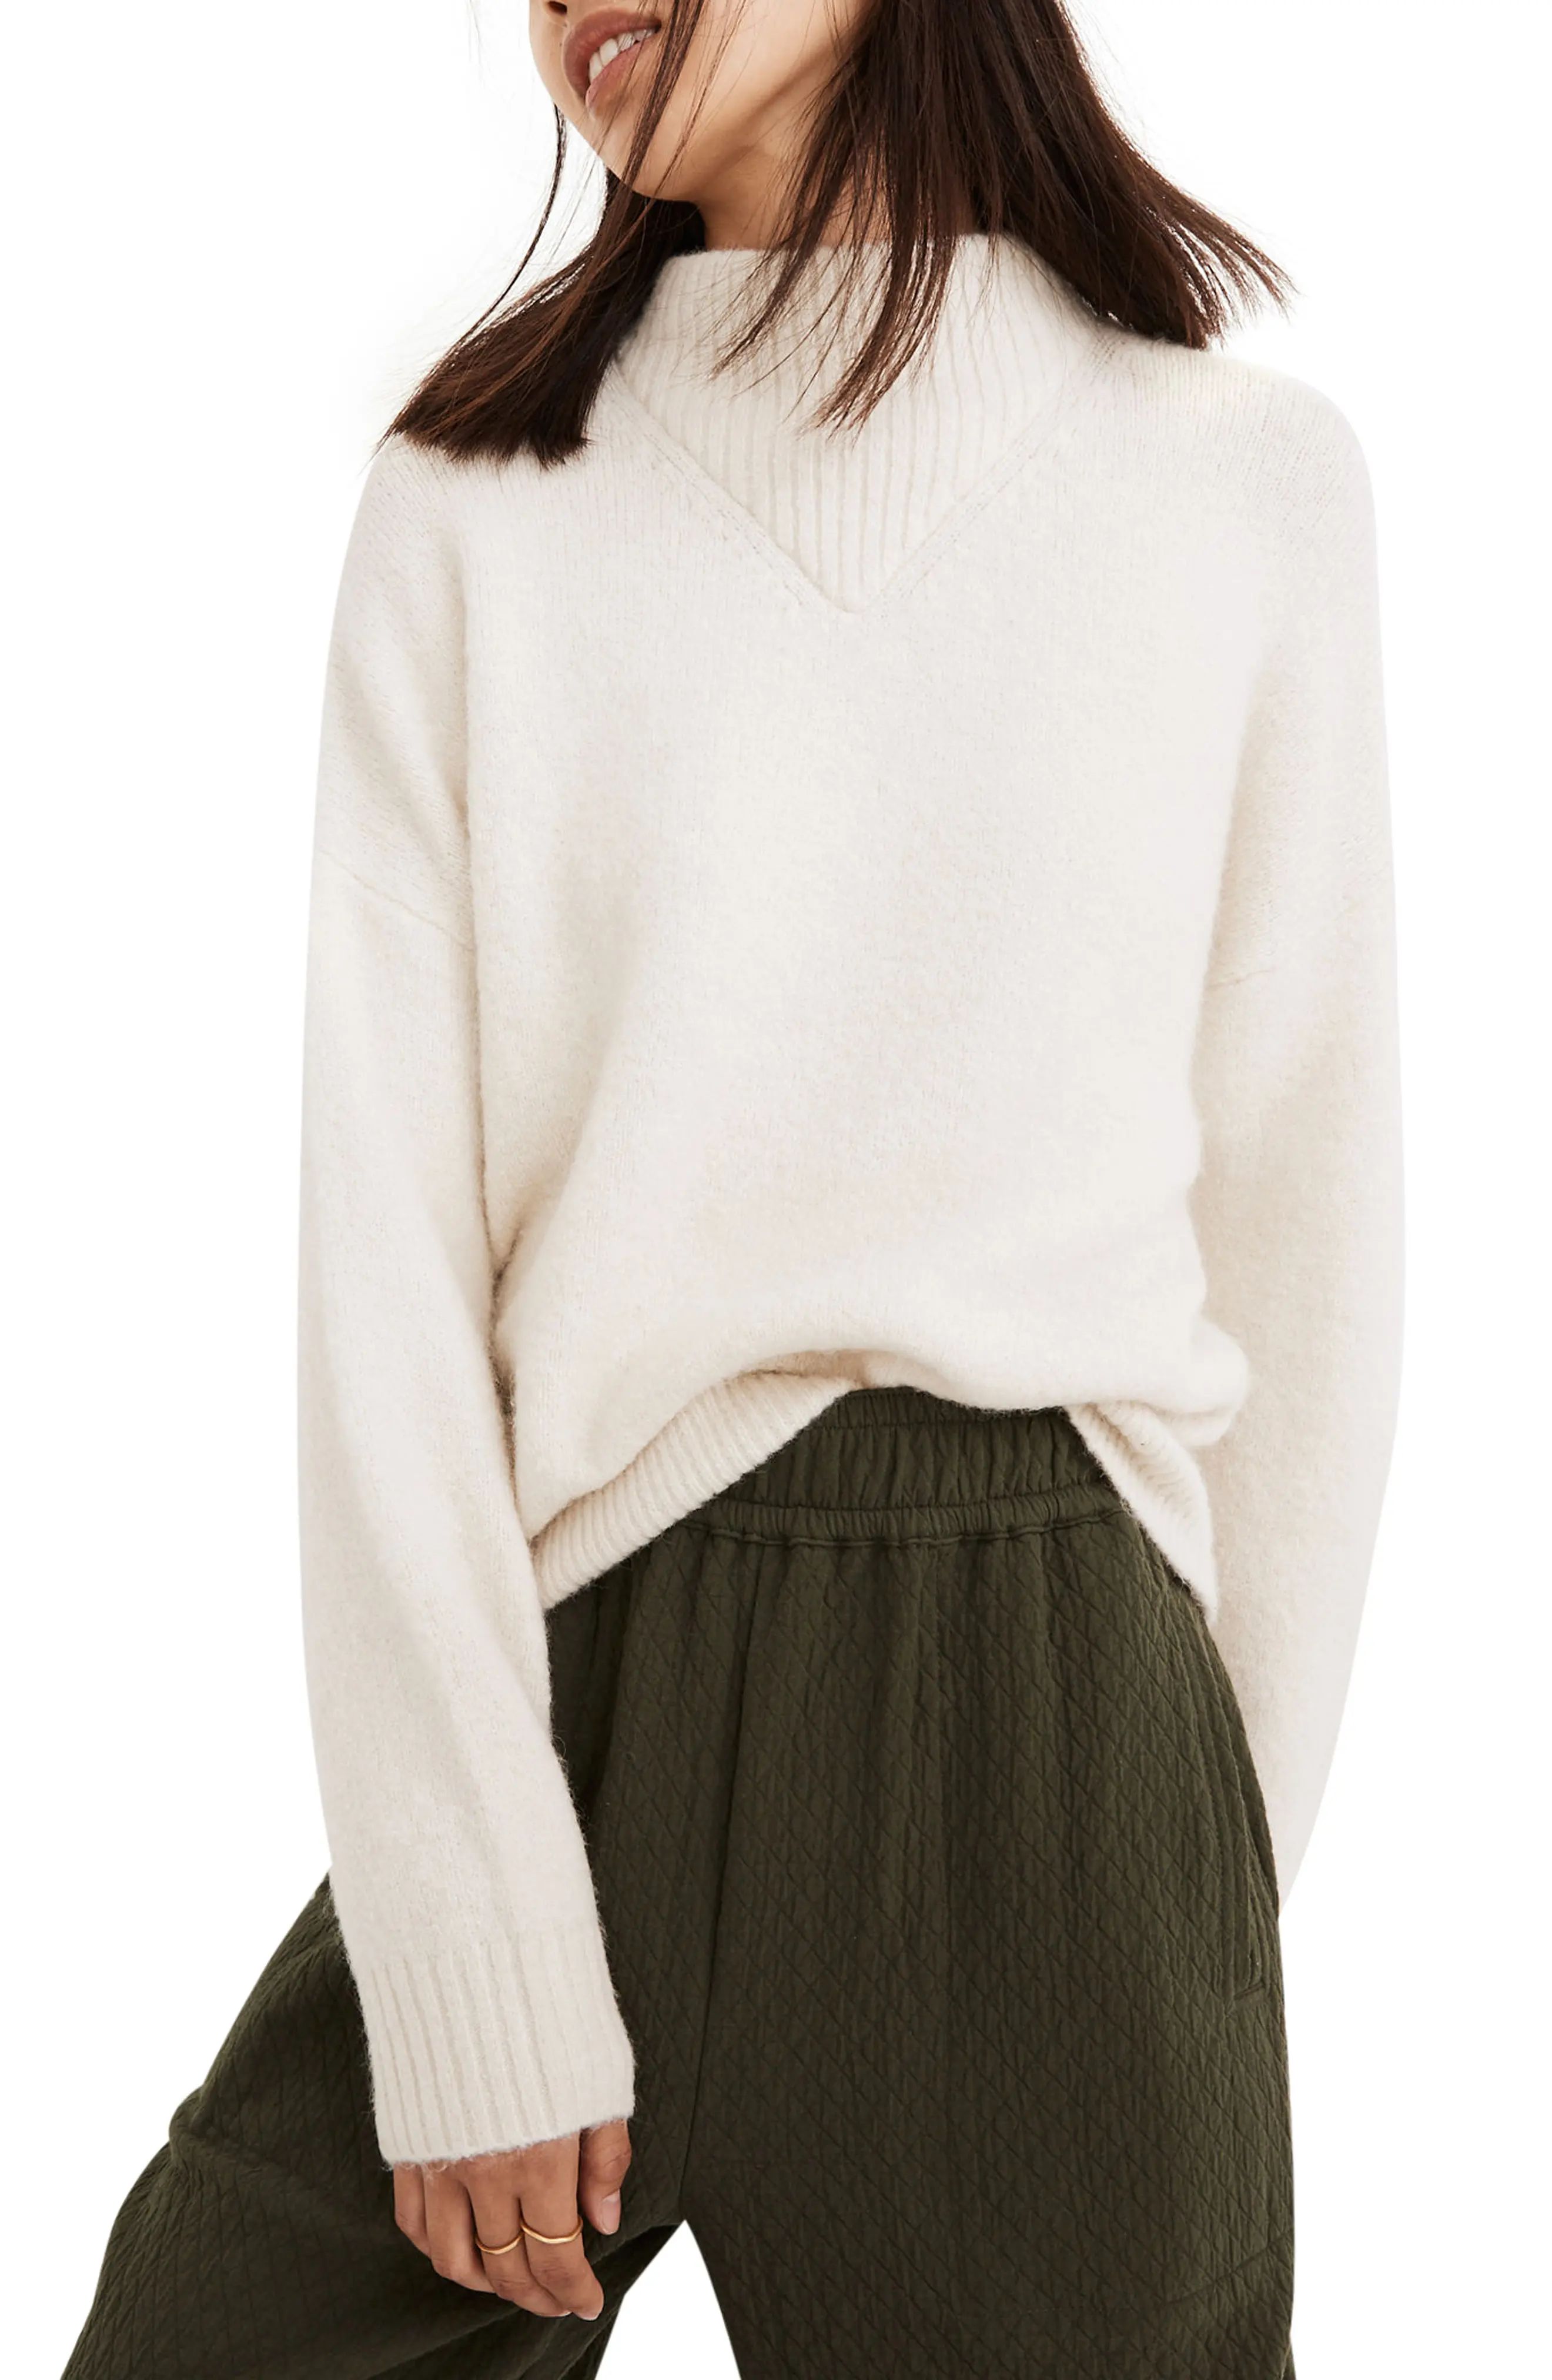 Madewell Dillon Mock Neck Pullover Sweater in Heather Eggshell at Nordstrom, Size Large | Nordstrom